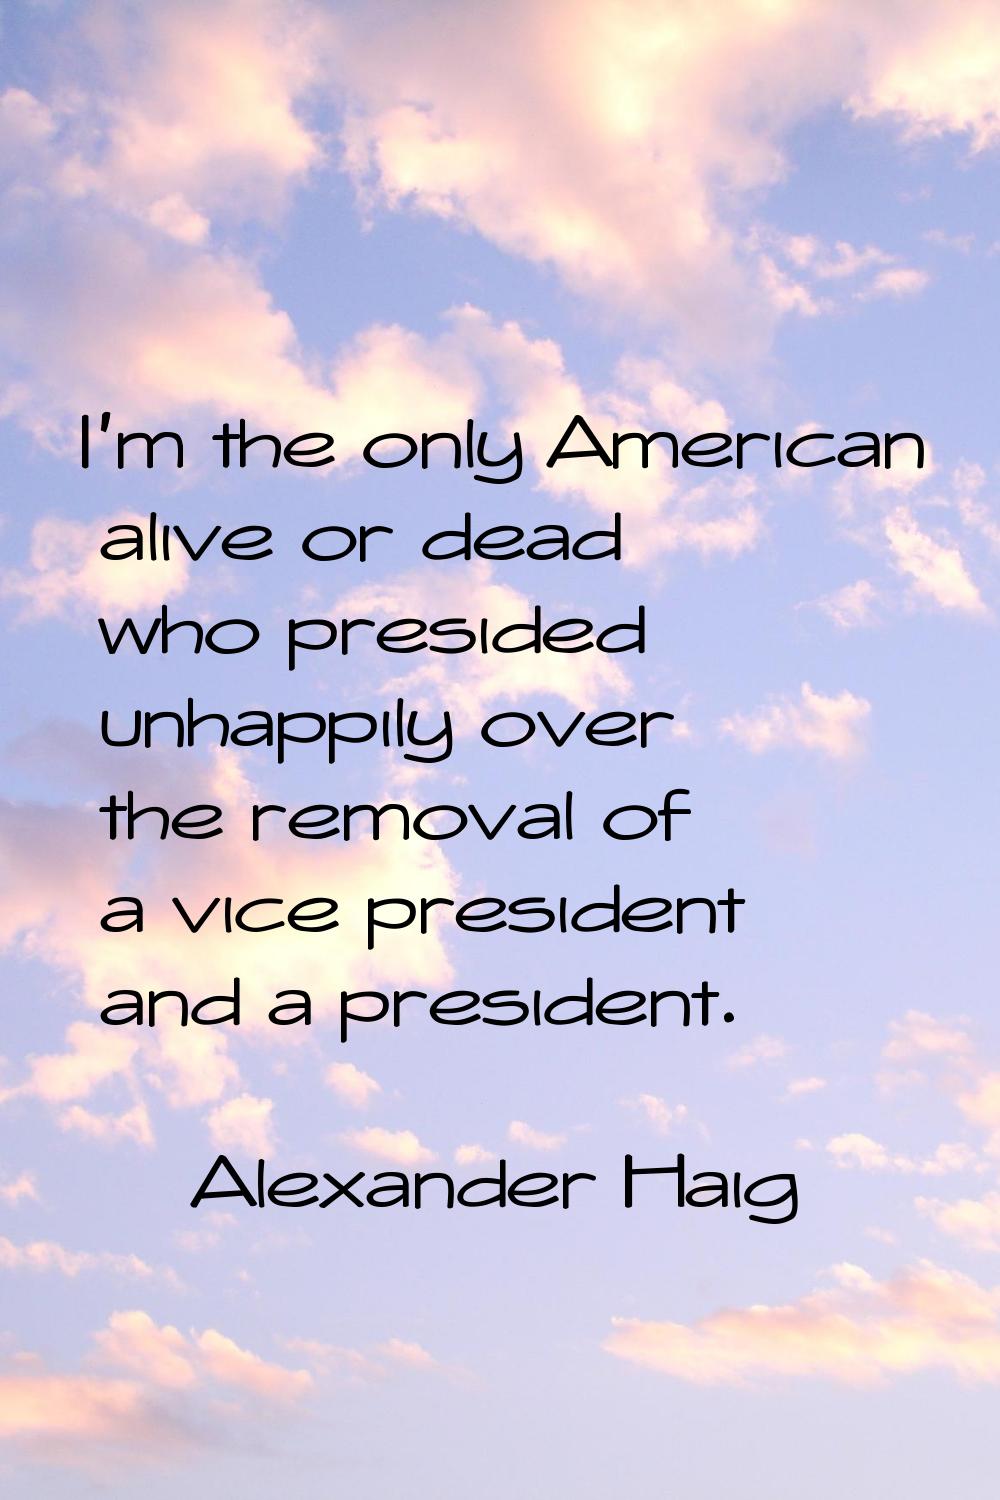 I'm the only American alive or dead who presided unhappily over the removal of a vice president and